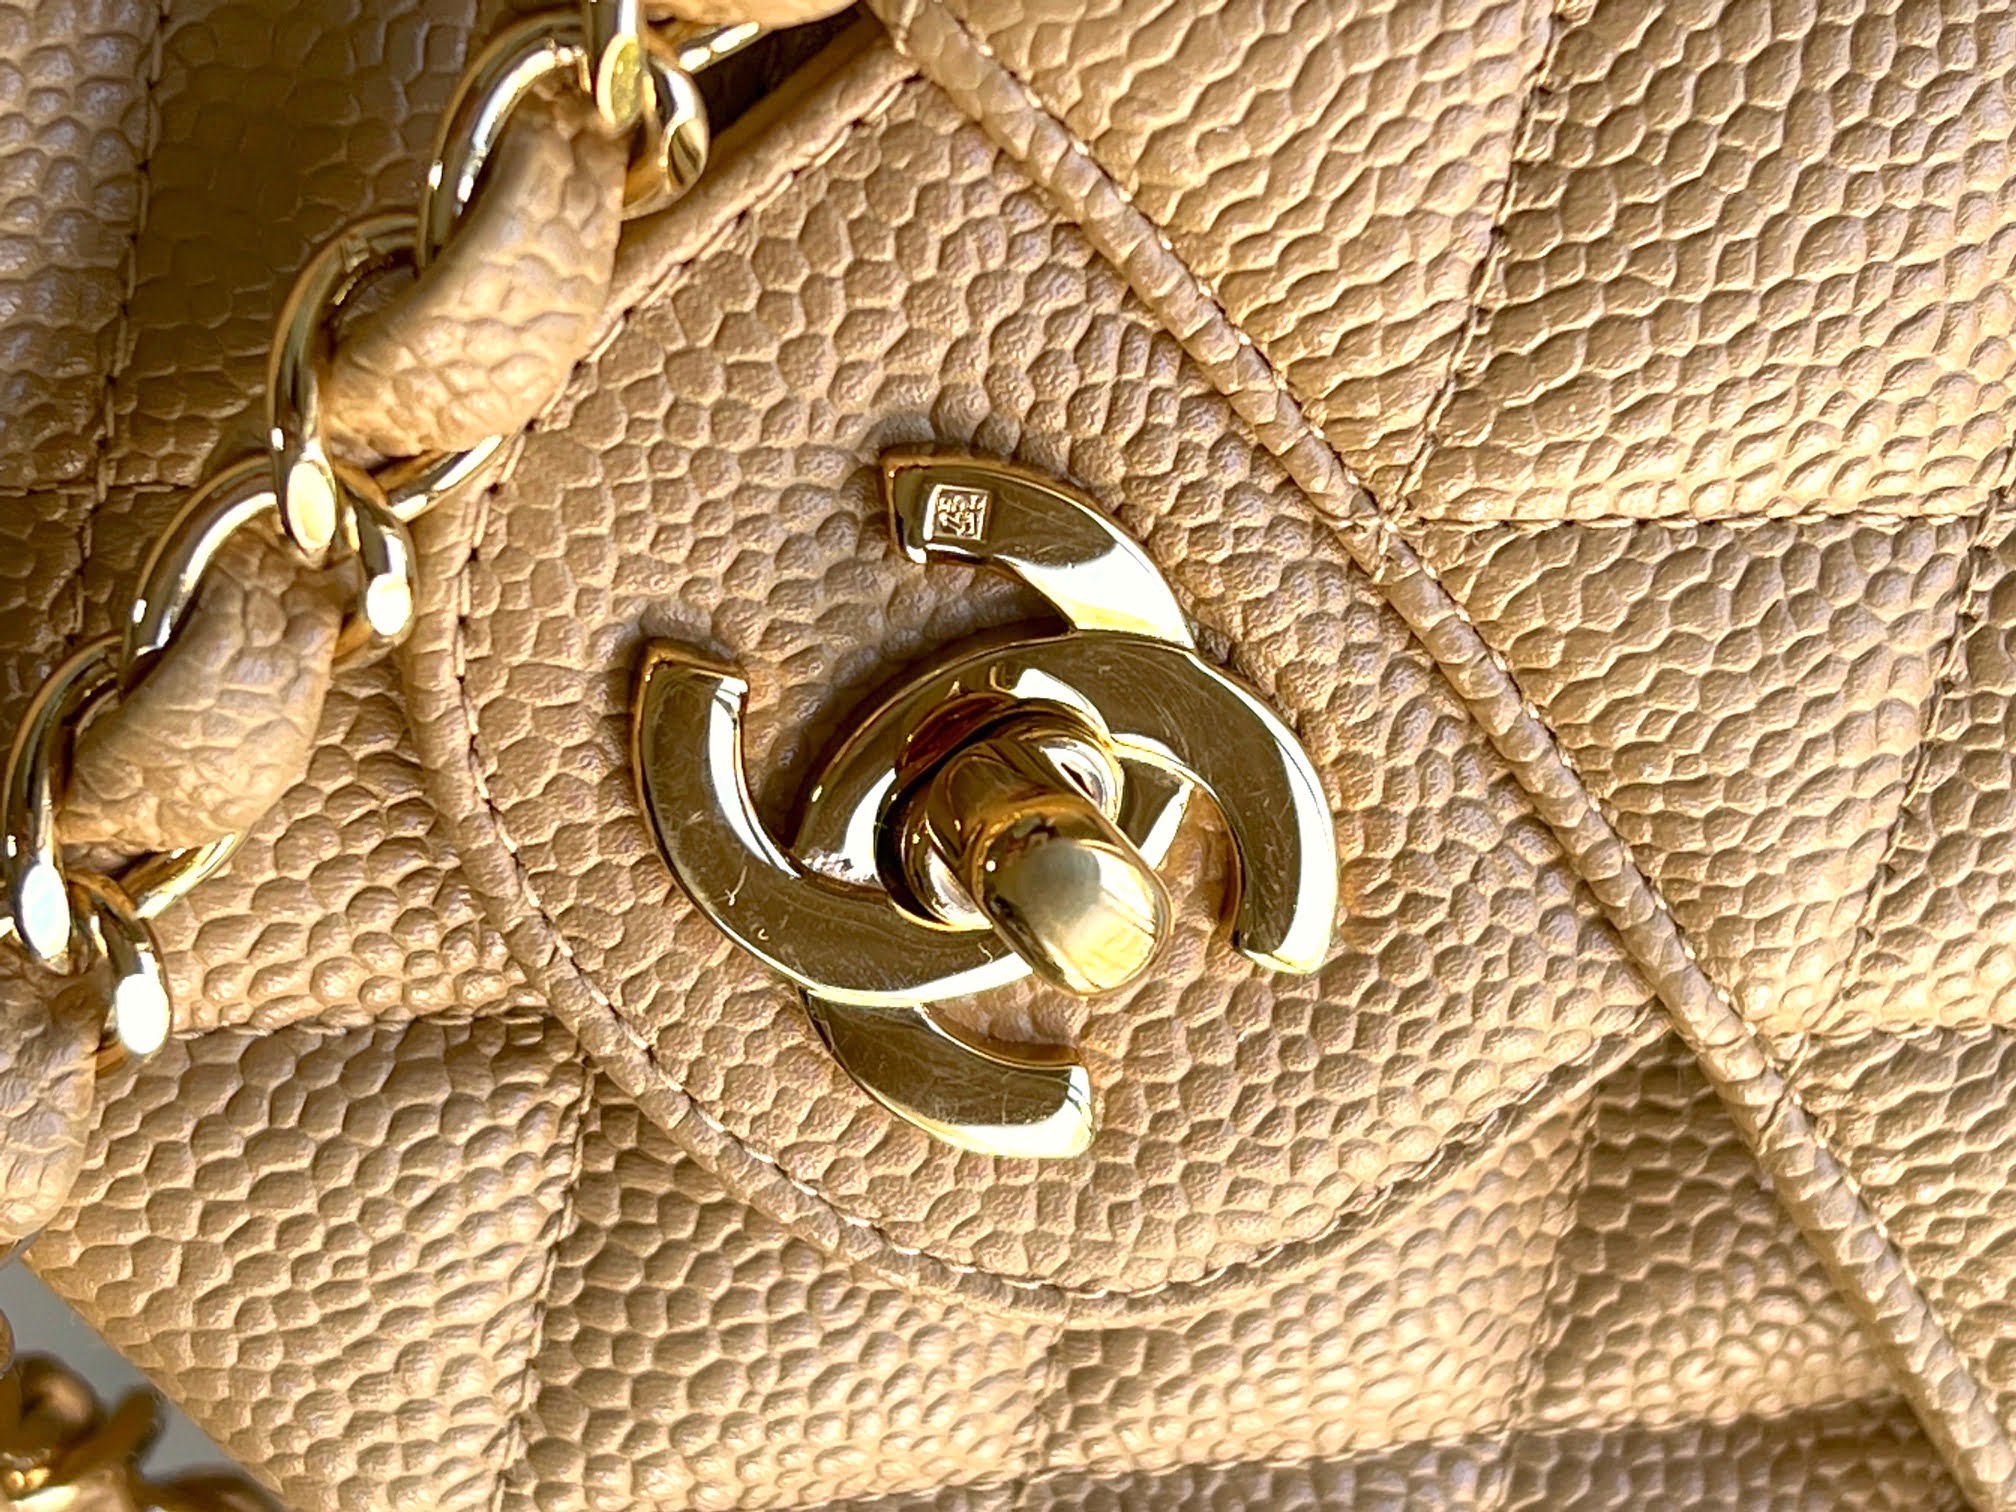 Uber Finds Vintage Fashion Store - Did you know that your vintage Chanel is  made with real gold? 🤔 . Prior to 2009, Chanel bags were made with real  24k gold hardware.